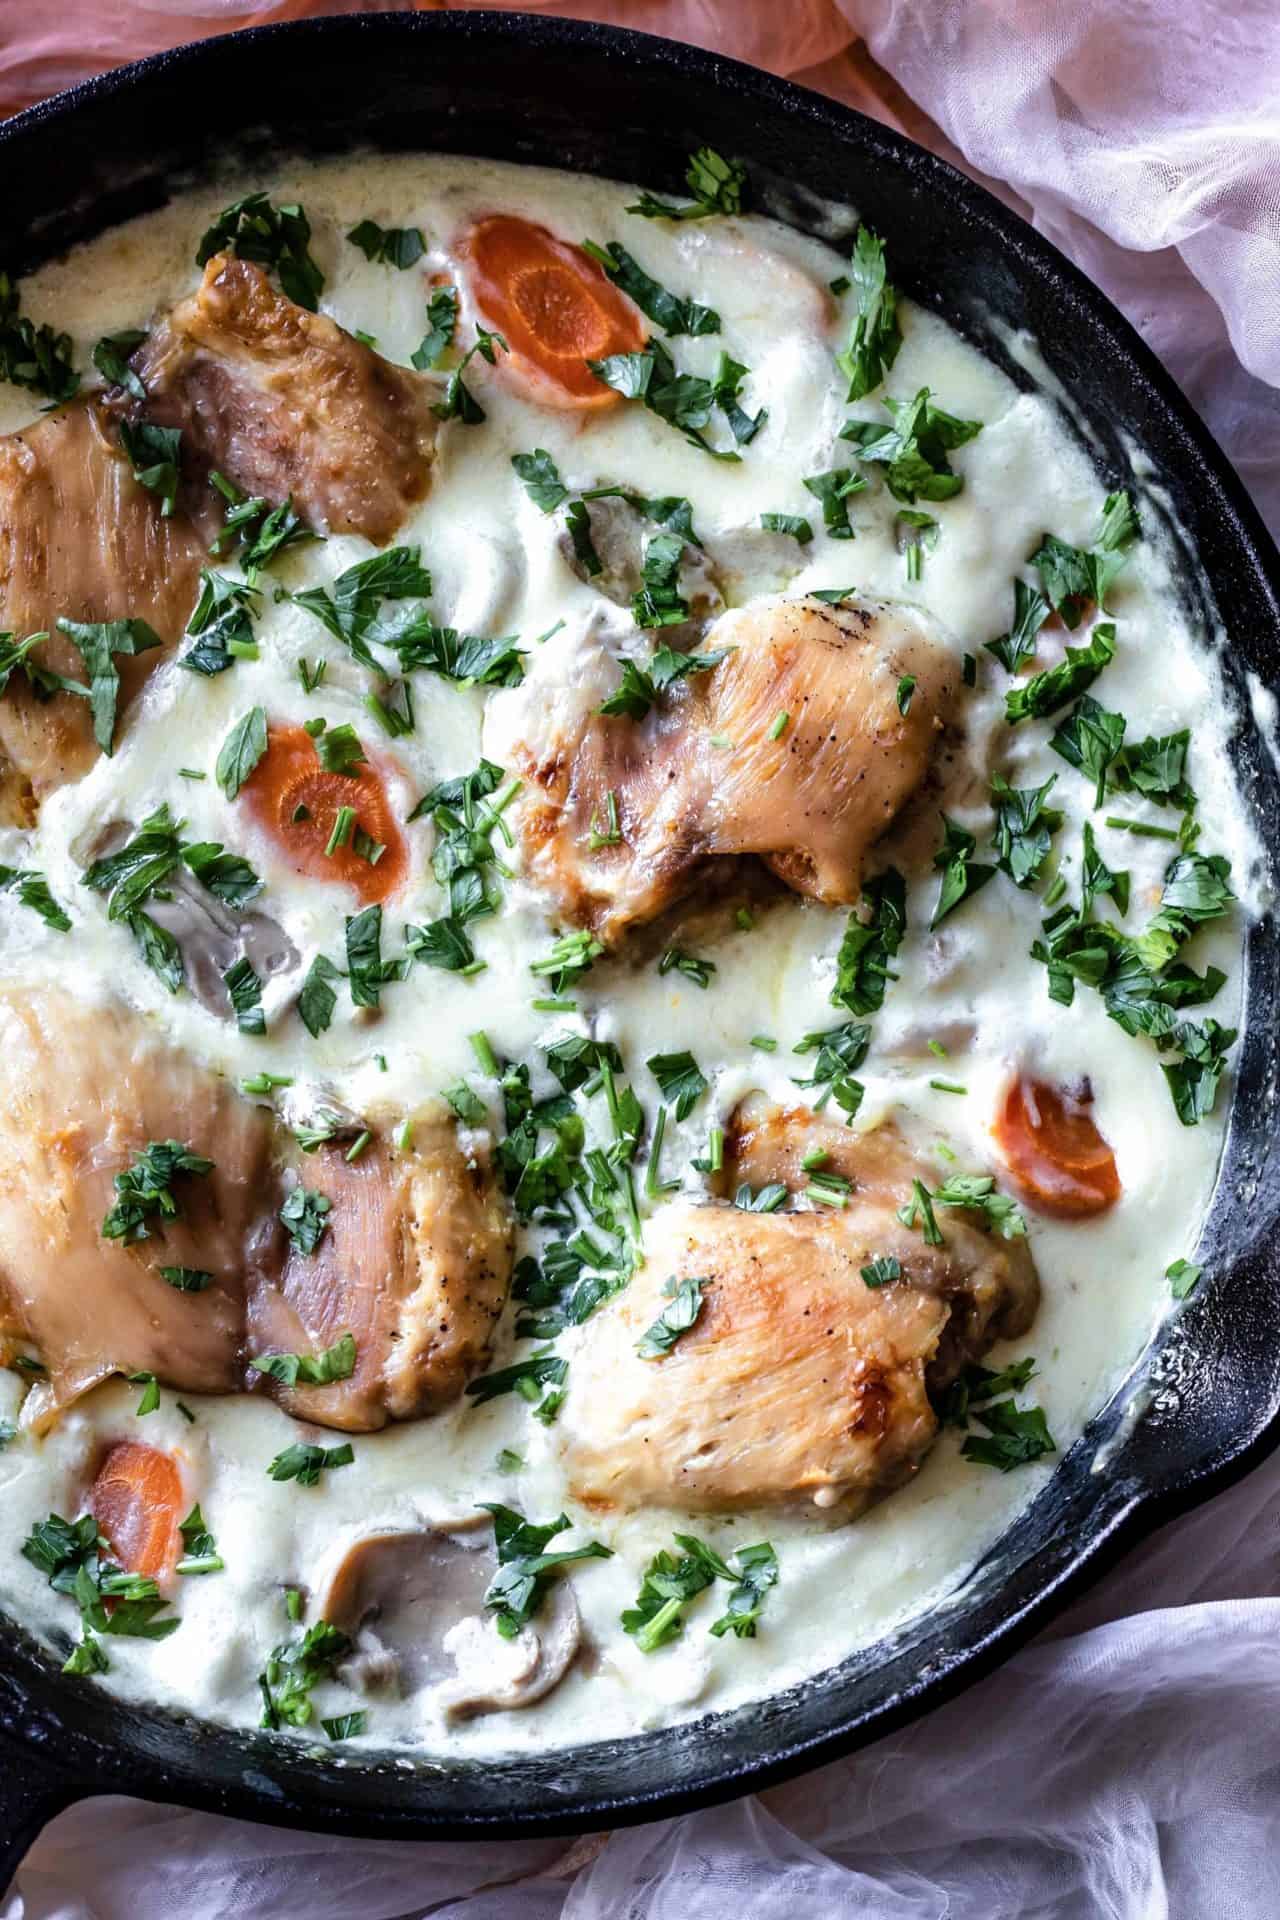 This Chicken Fricassee is super creamy, savory, filling, very flavorful, comforting, and beyond delicious!
